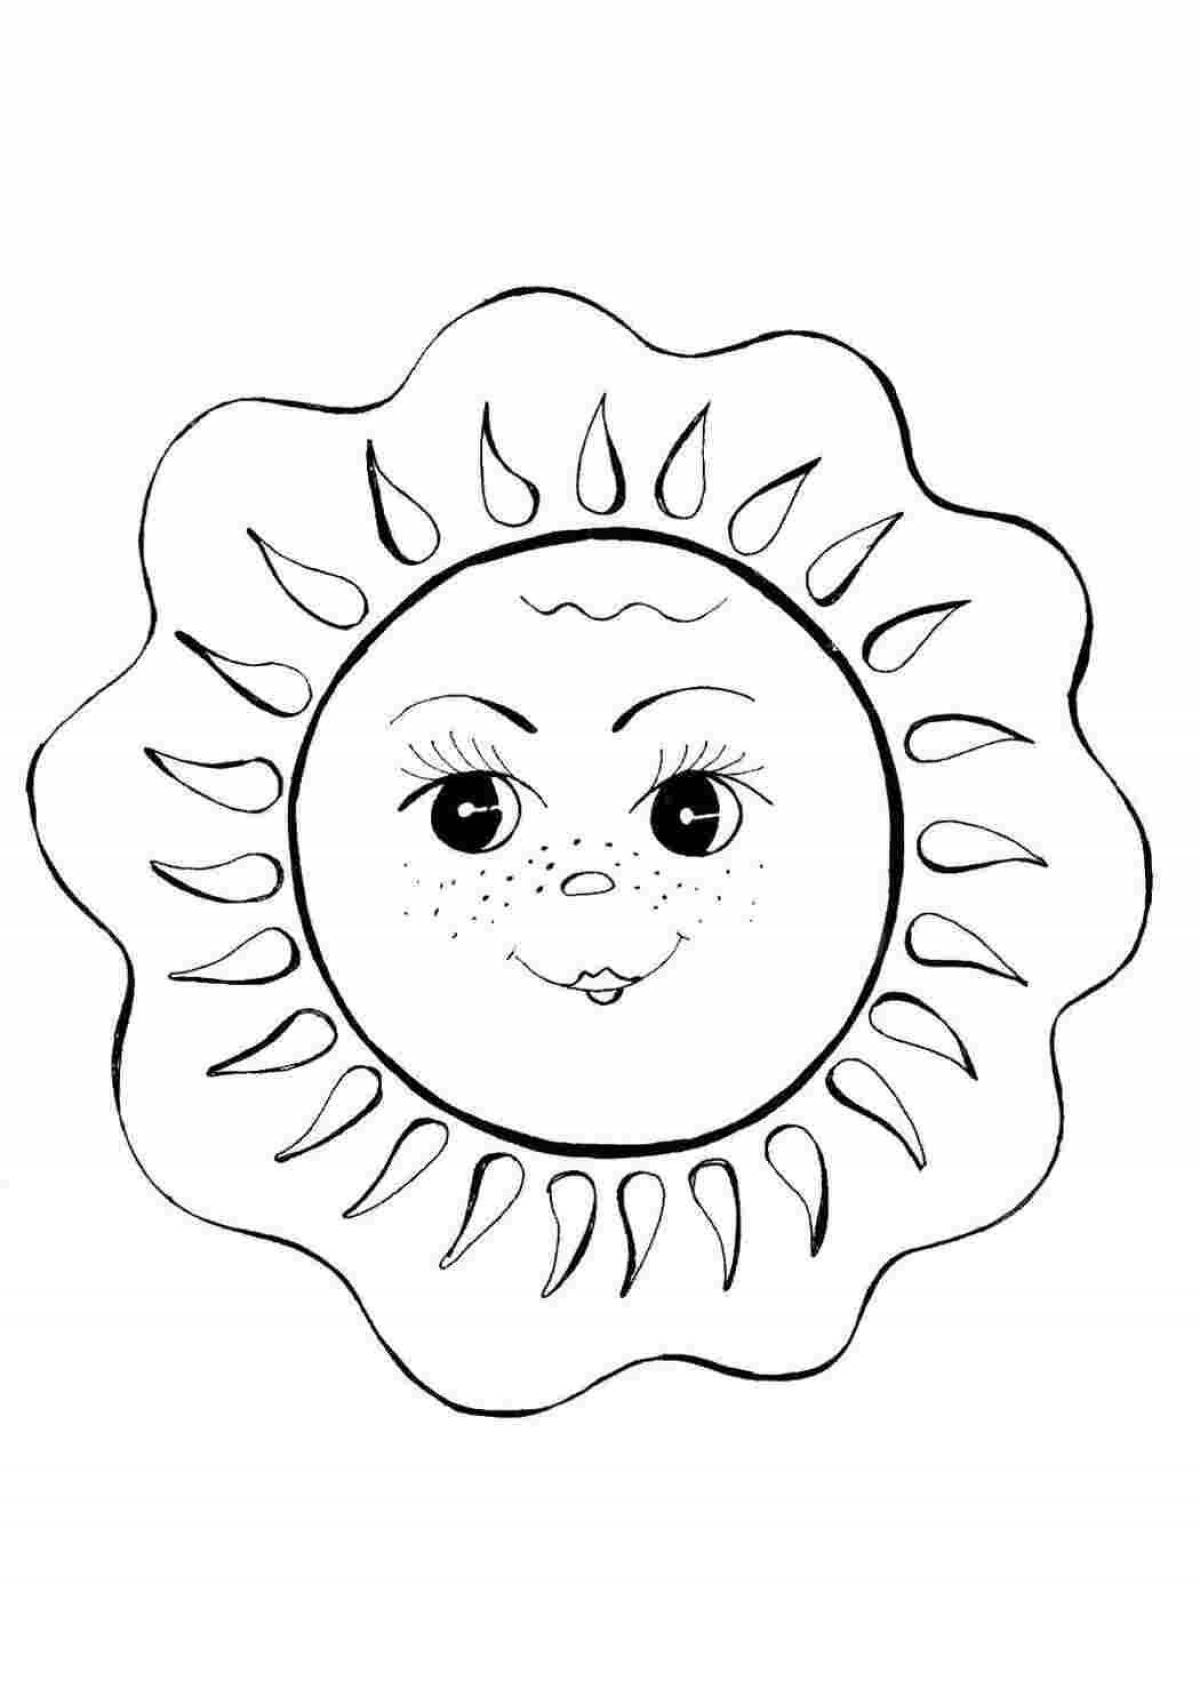 Amazing coloring book sun for kids